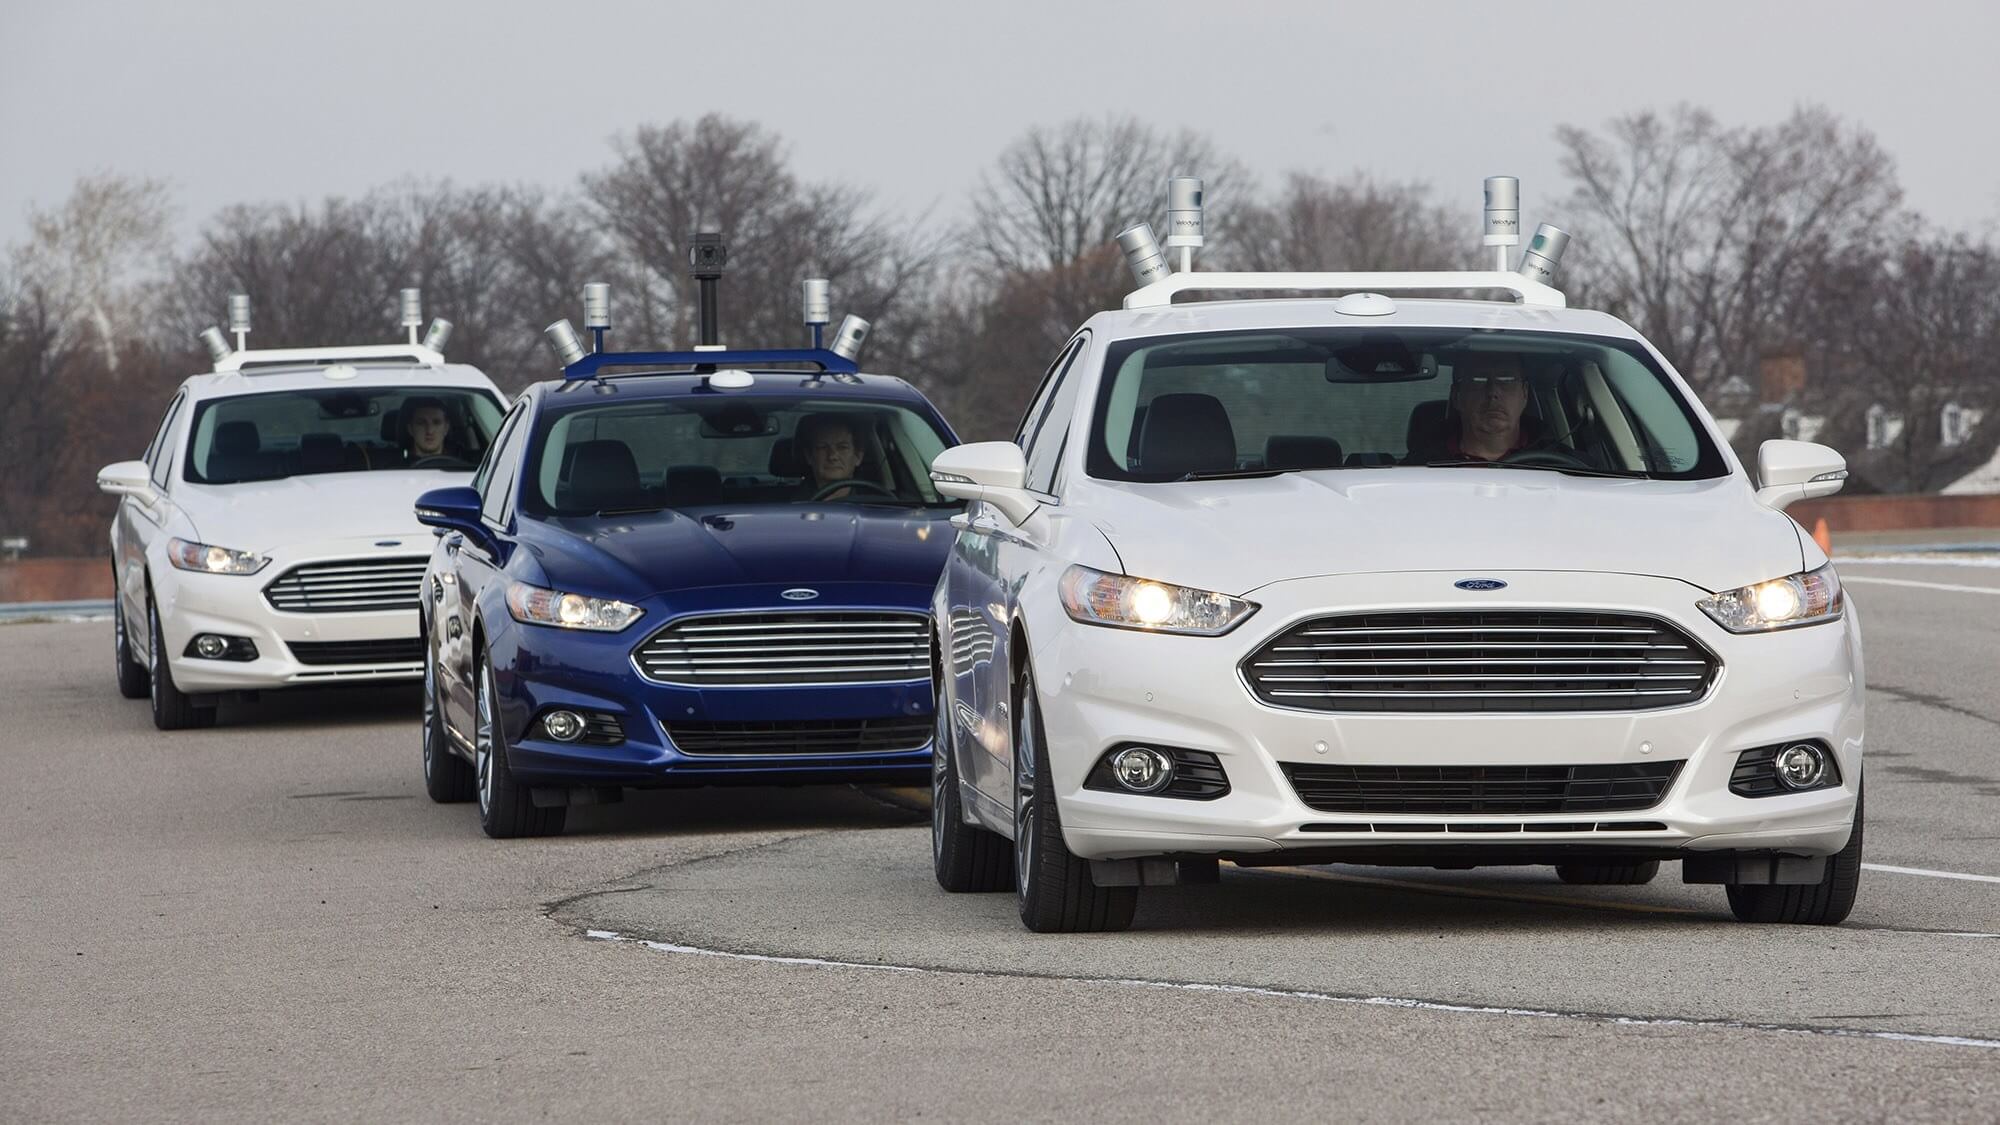 Ford reveals some concerns about self driving cars